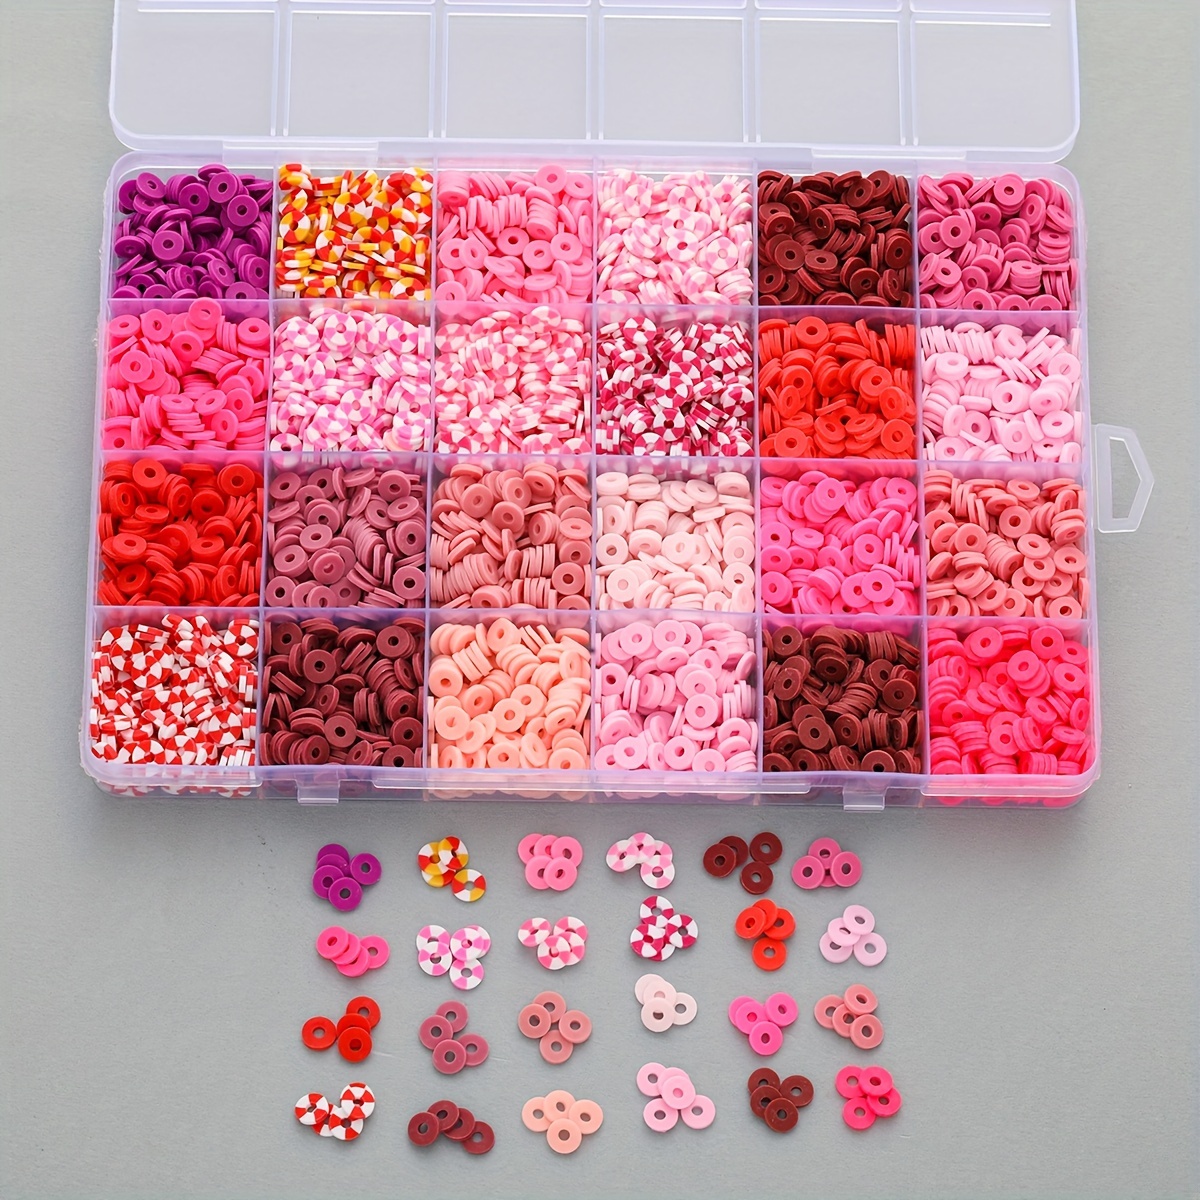 

A Box Of 4800pcs 24-color Polymer Clay Beads, Gasket Beads, Heishi Beads Suitable For Making Necklaces, Bracelets, Mobile Phone Chains And Diy Jewelry